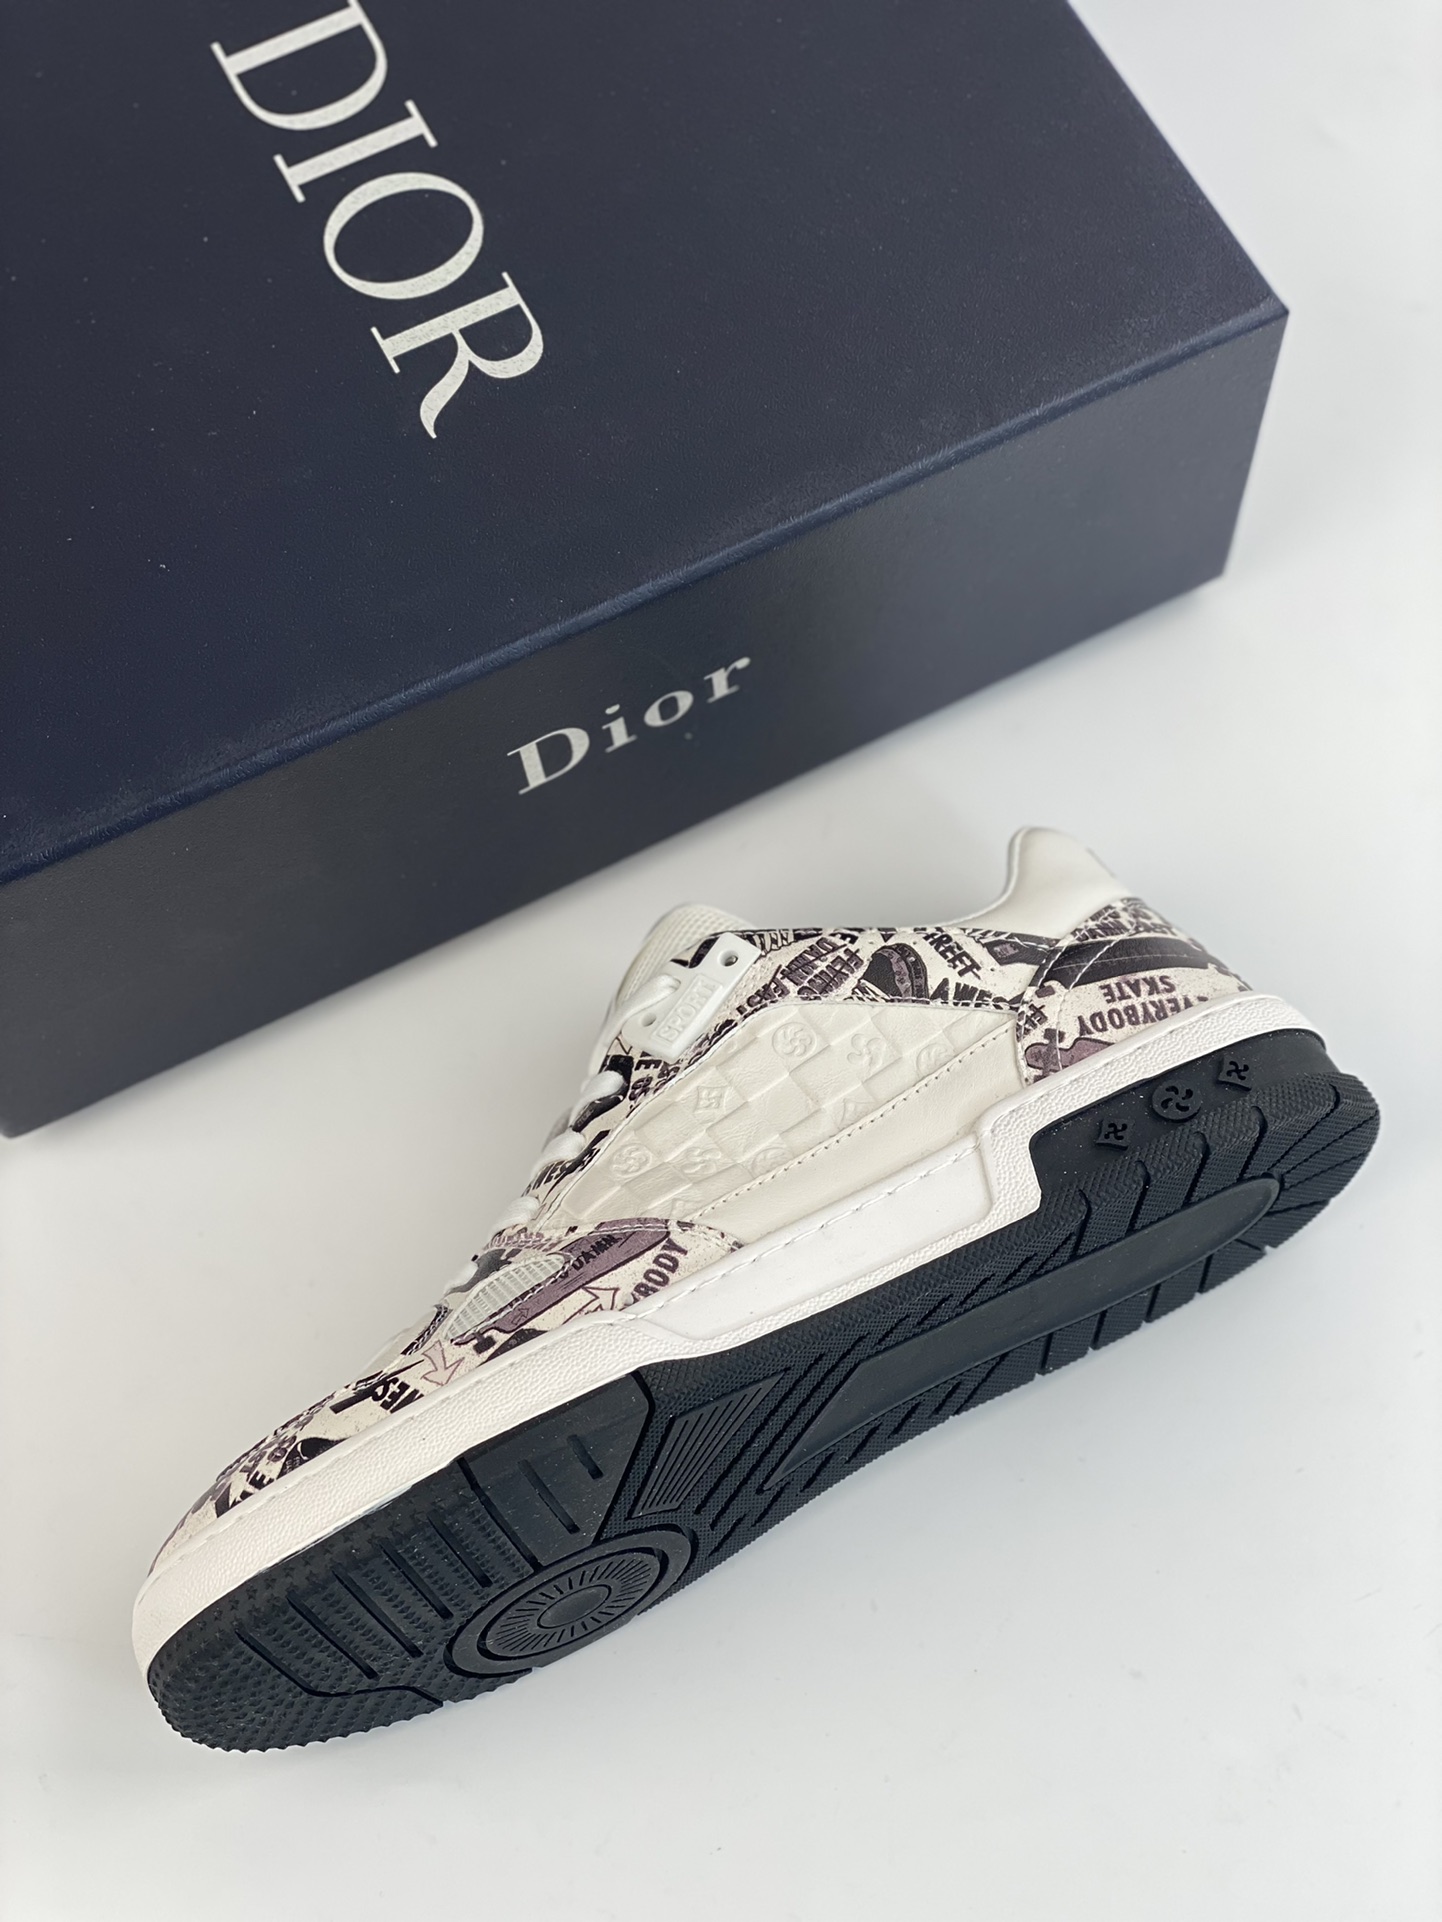 Dior Dior casual fashion sports shoes series Guangdong quality original factory 22ss autumn new